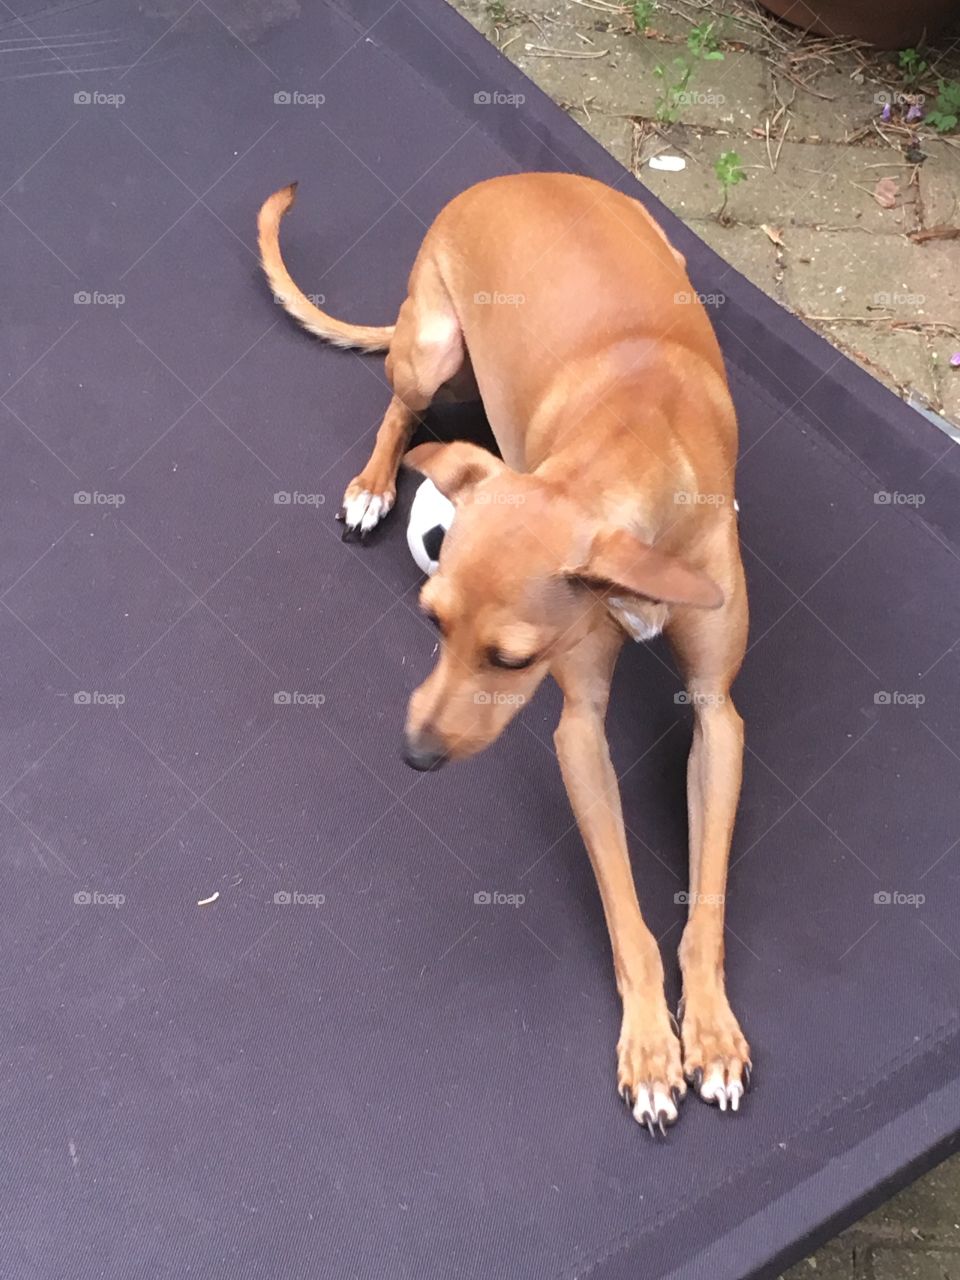 Amber the fawn Italian greyhound puppy having a great time playing with a football in the summer